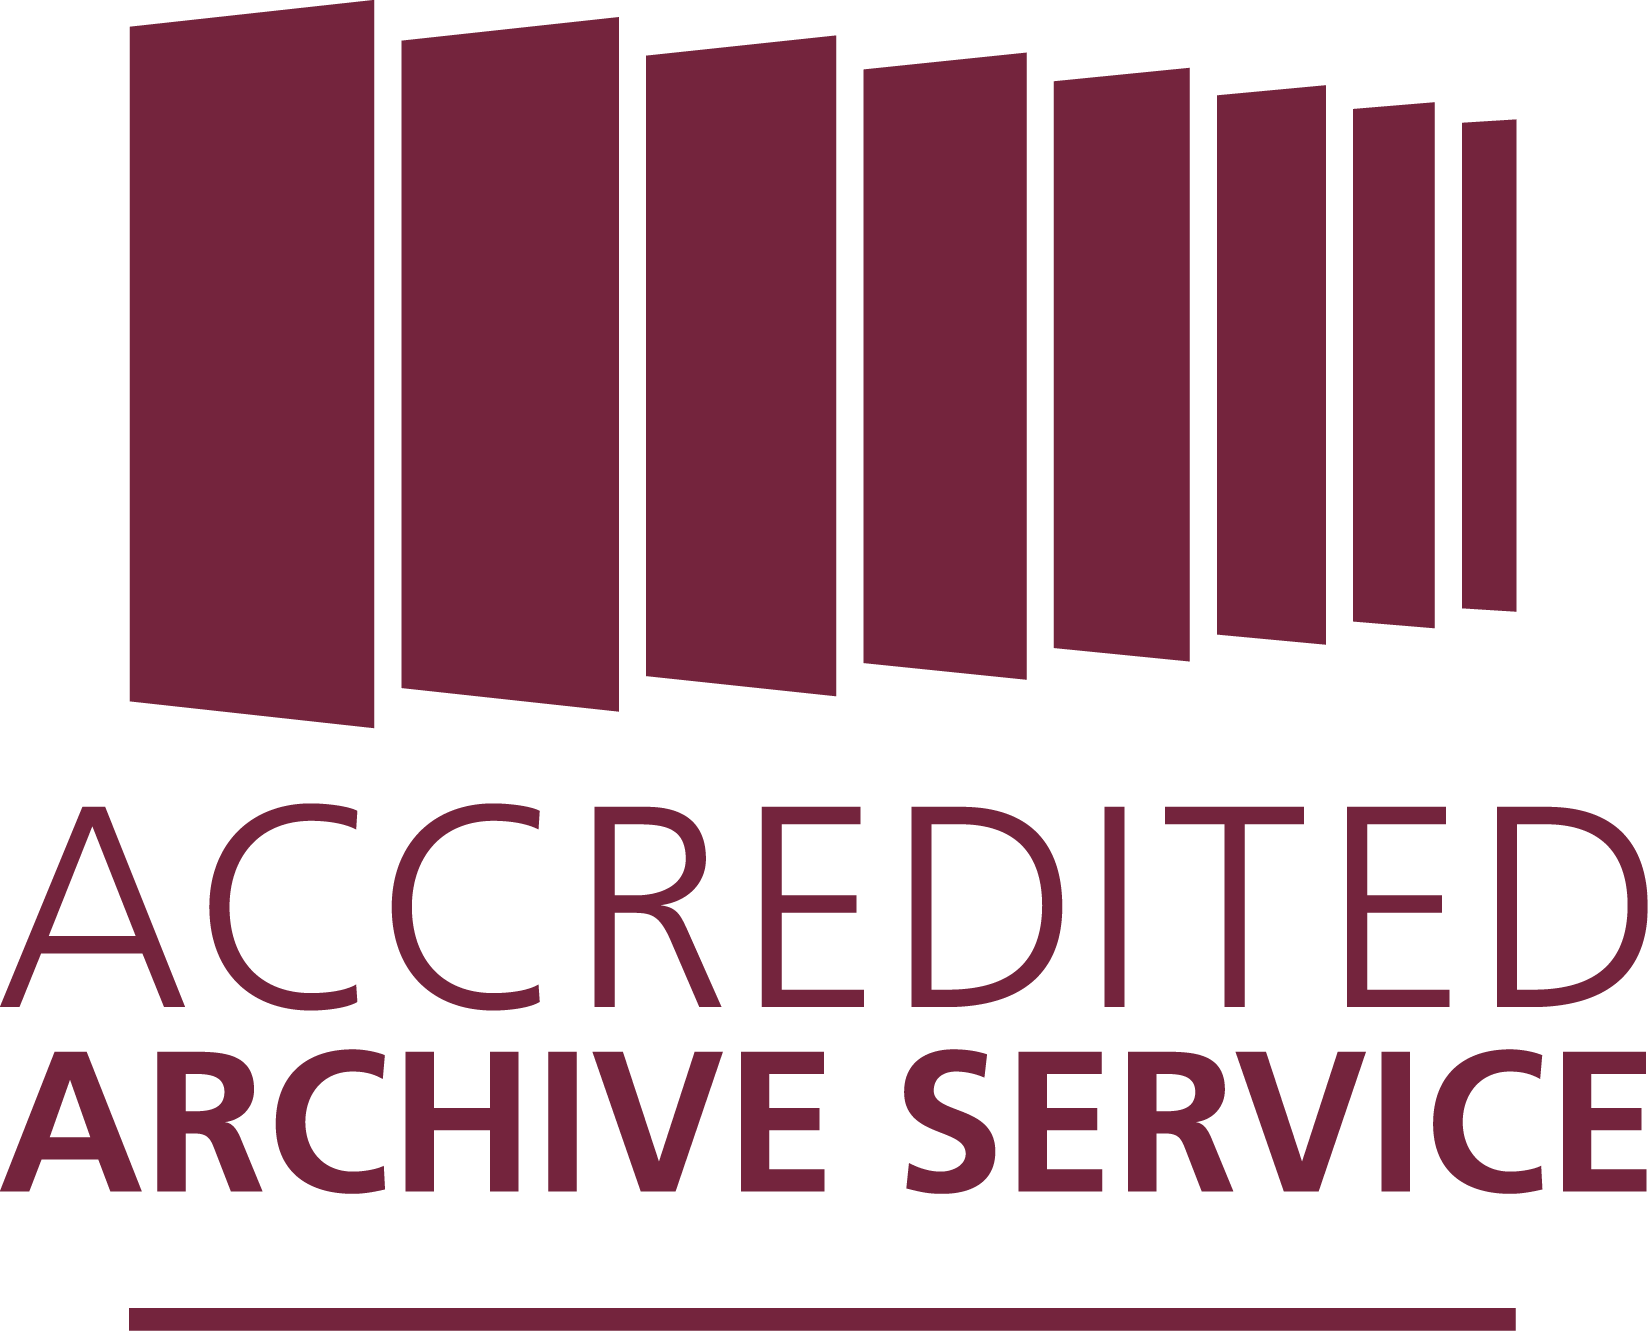 The National Archives: Accredited Archive Service logomark